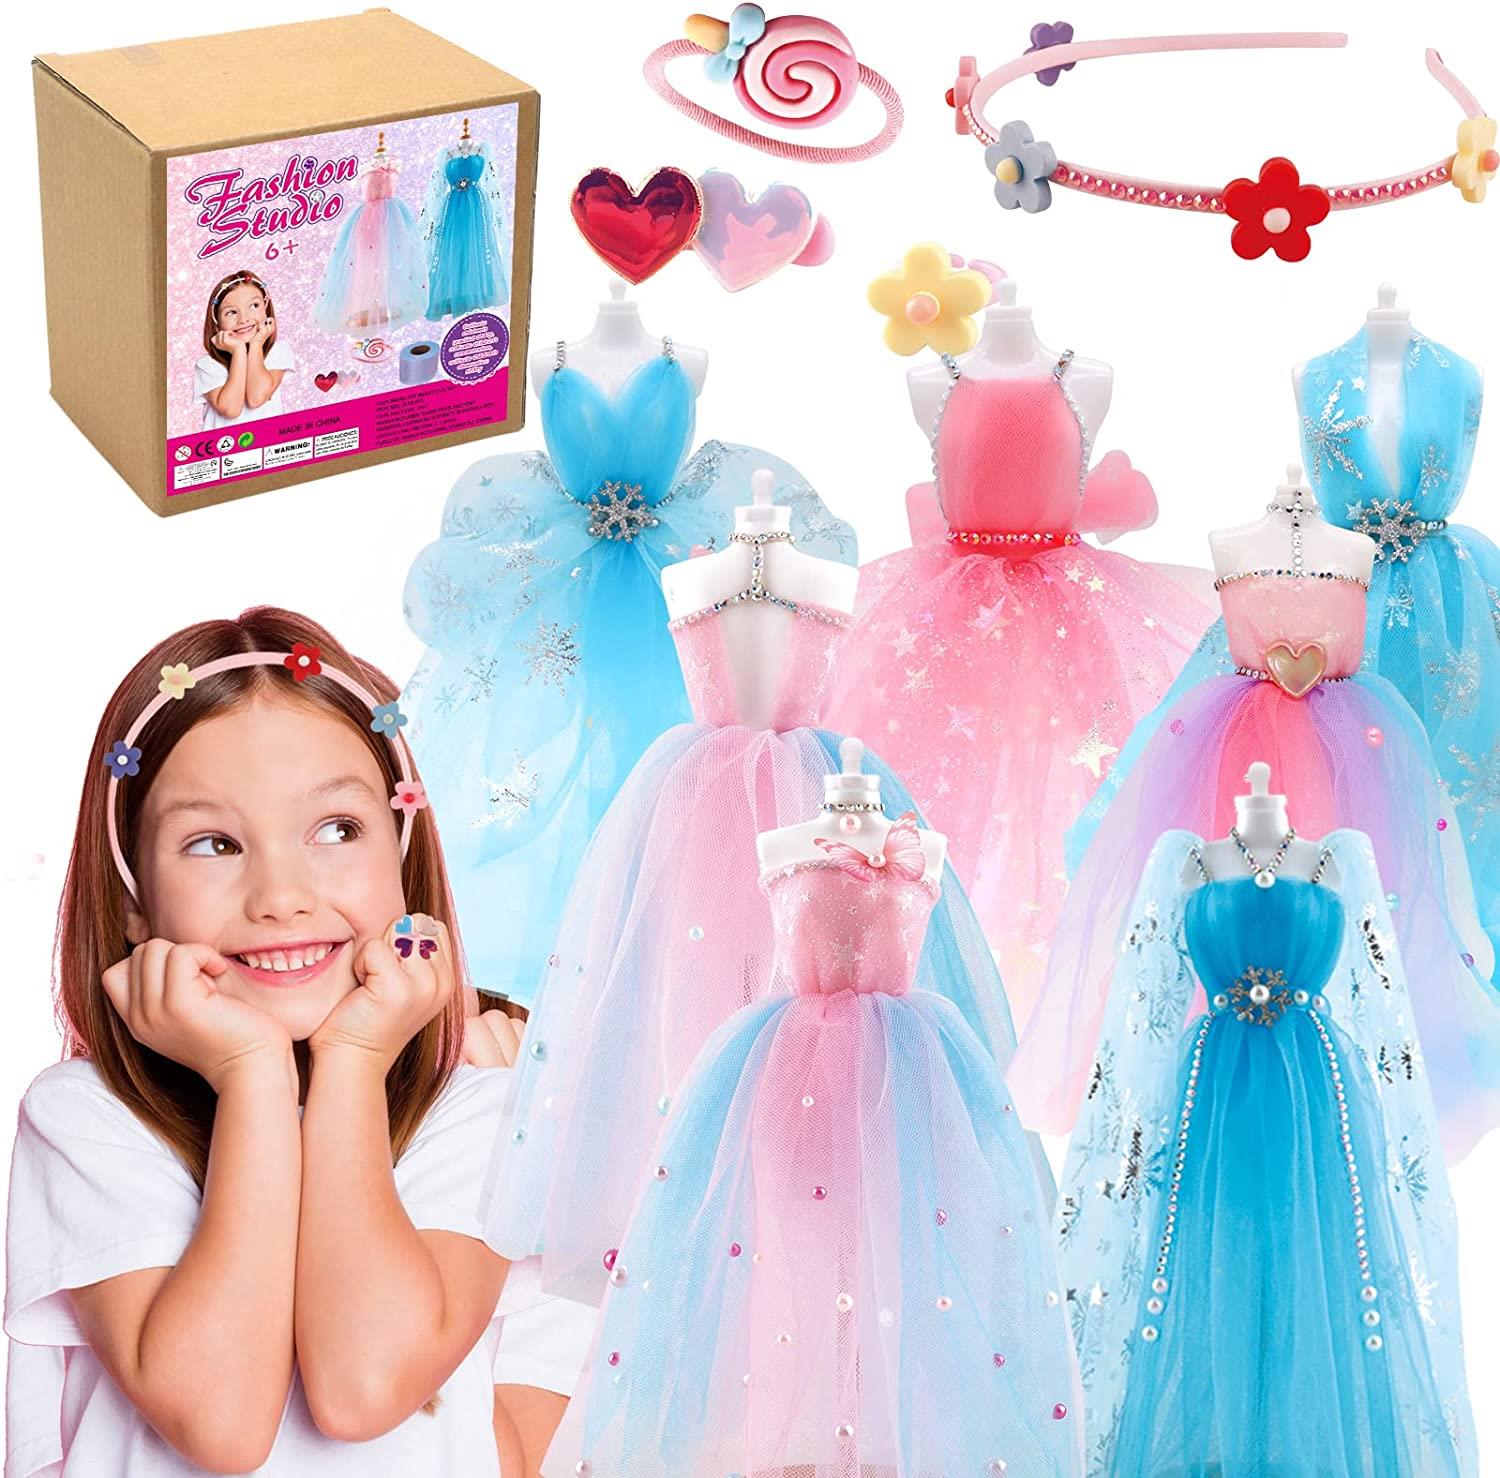 Cymbana 100+ Fashion Designer Kits for Girls with Sewing Kit to Design Your  Own Headbands, Ring, Hair Ties, Hair Clips, 2 Mannequins Art and Craft for  Kids 6-12 Birthday Gift - cymban